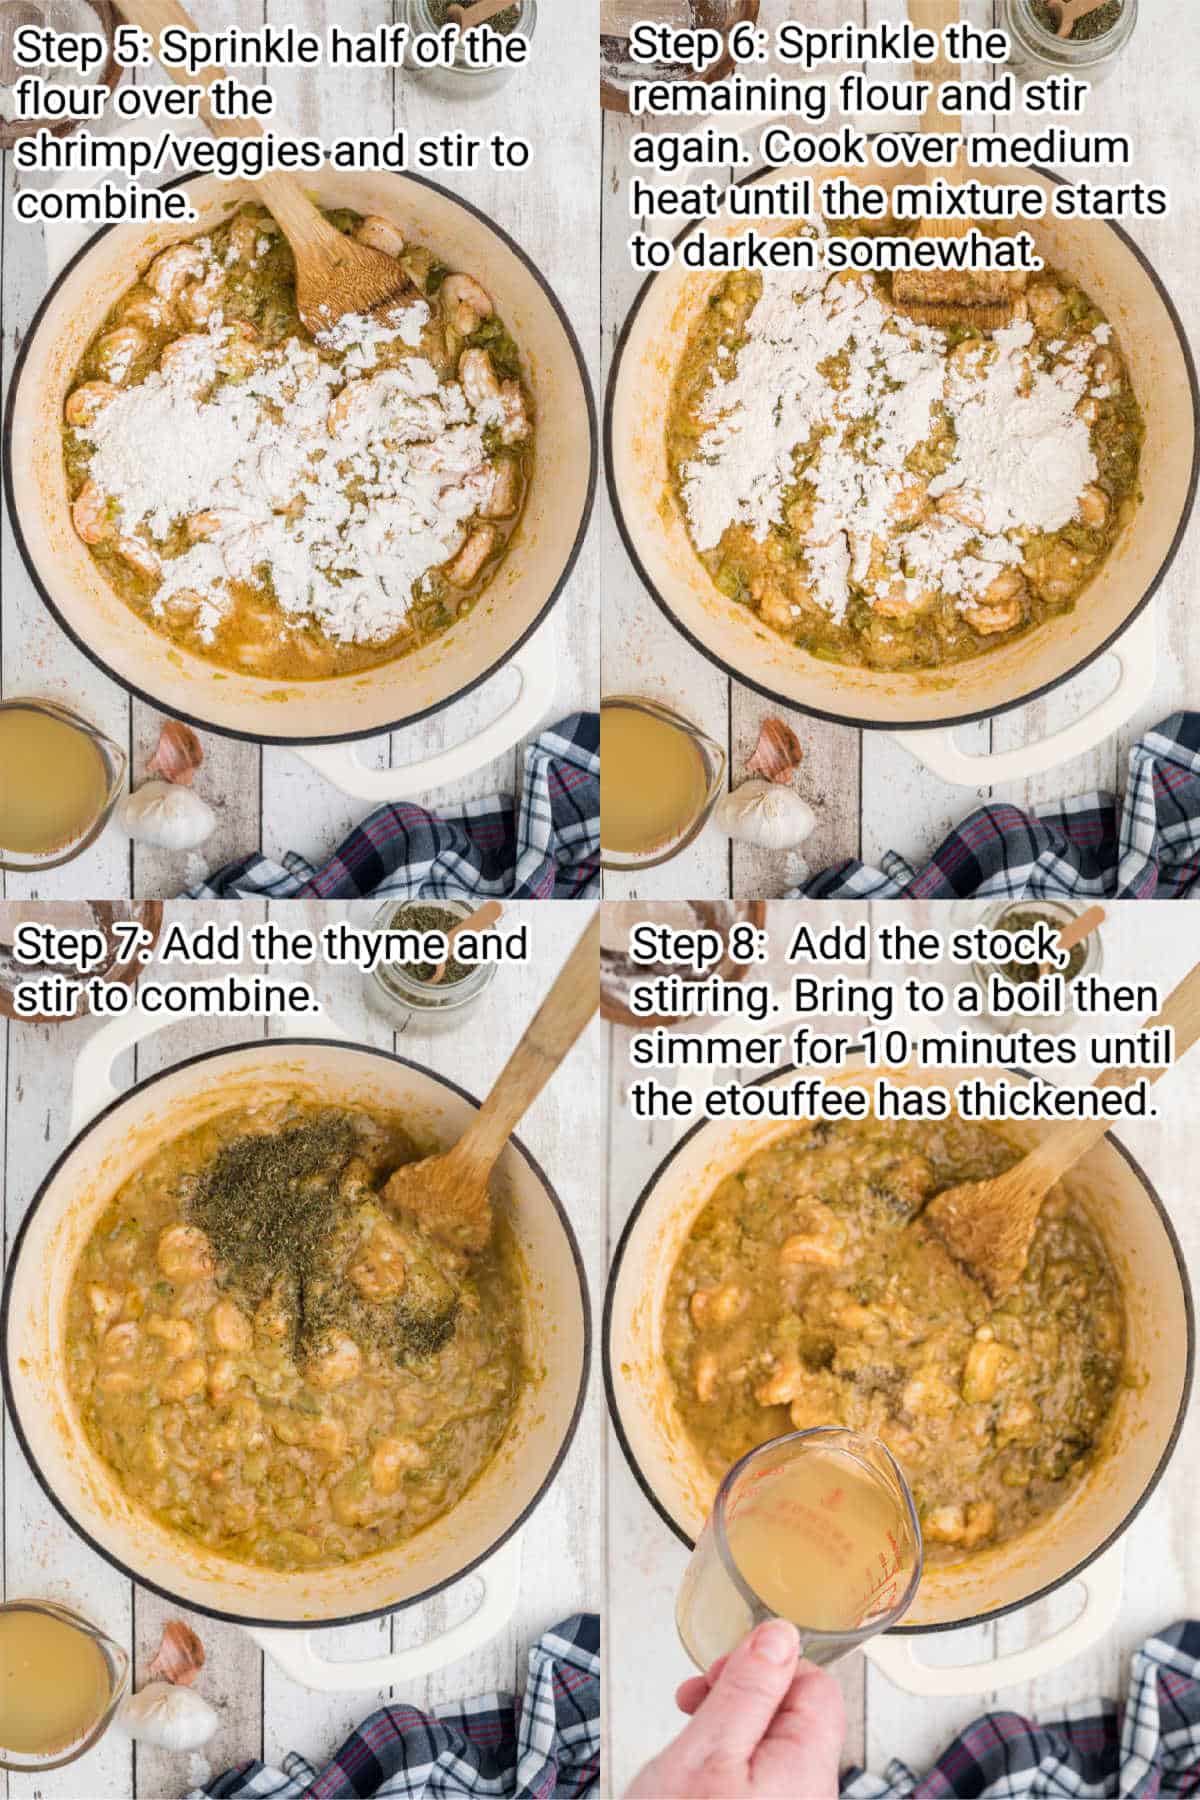 four images showing how to make a shrimp etouffee